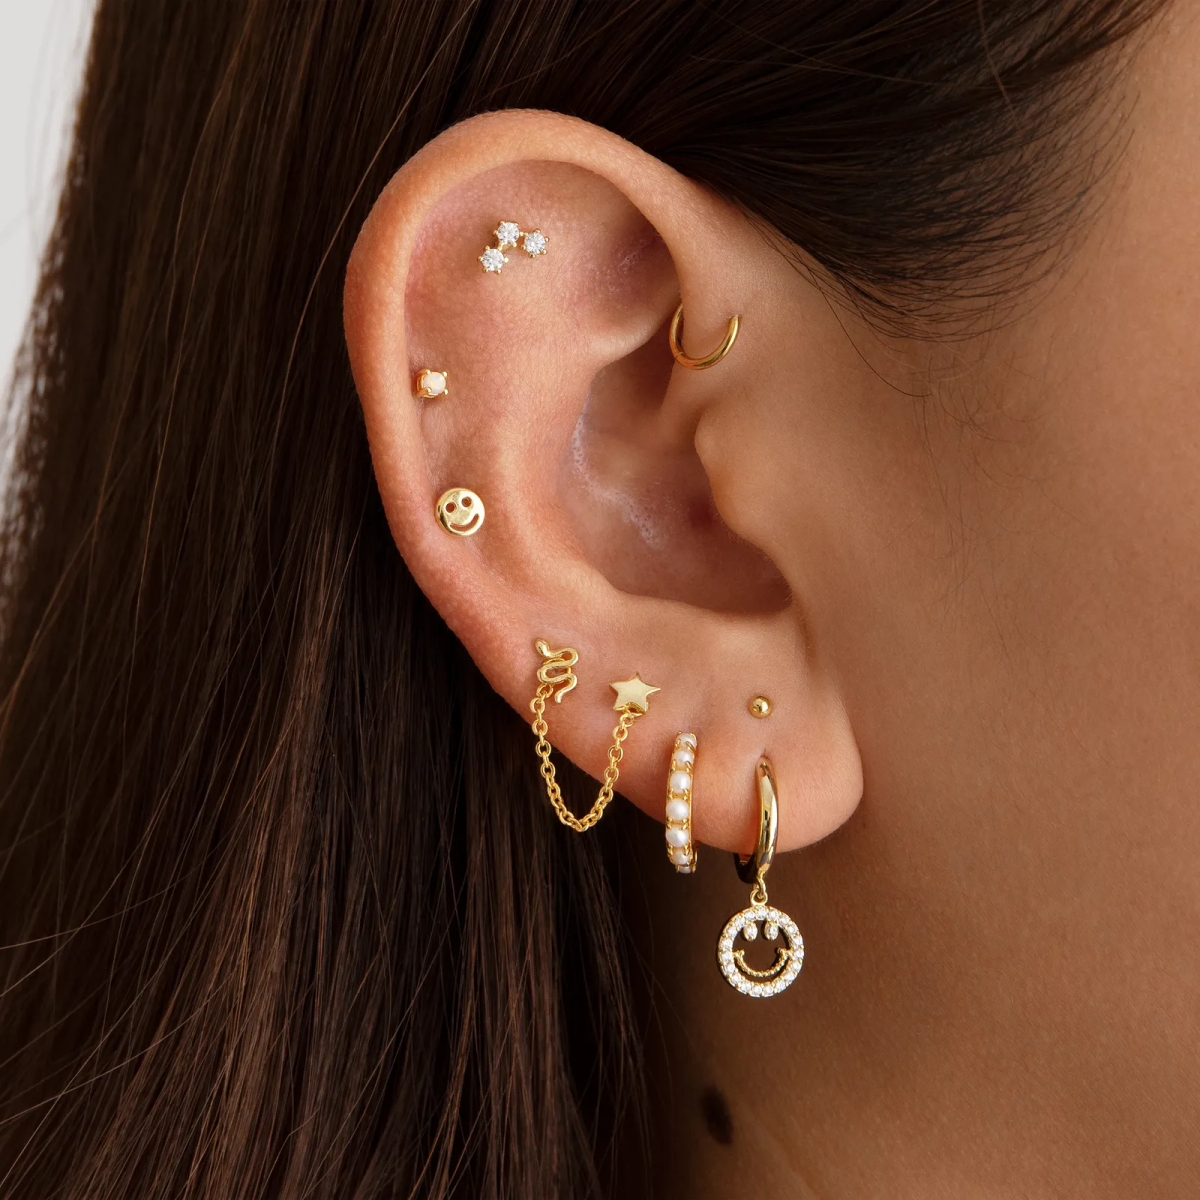 Exploring the Double Helix Piercing: All You Really Need to Know